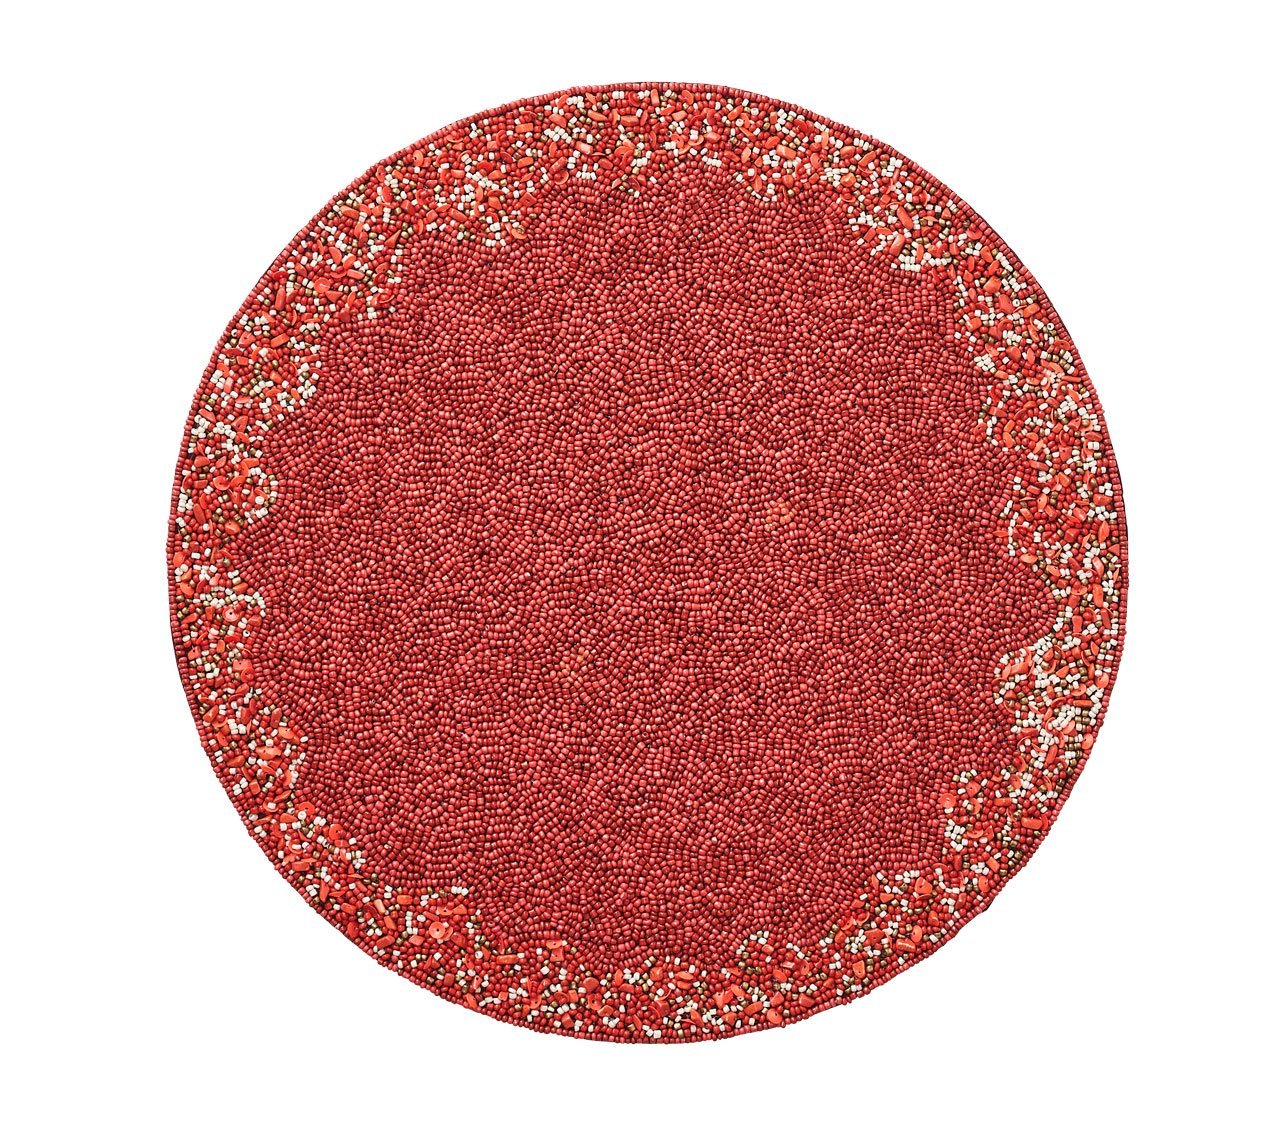 Beaded Maui Placemat in coral & gold